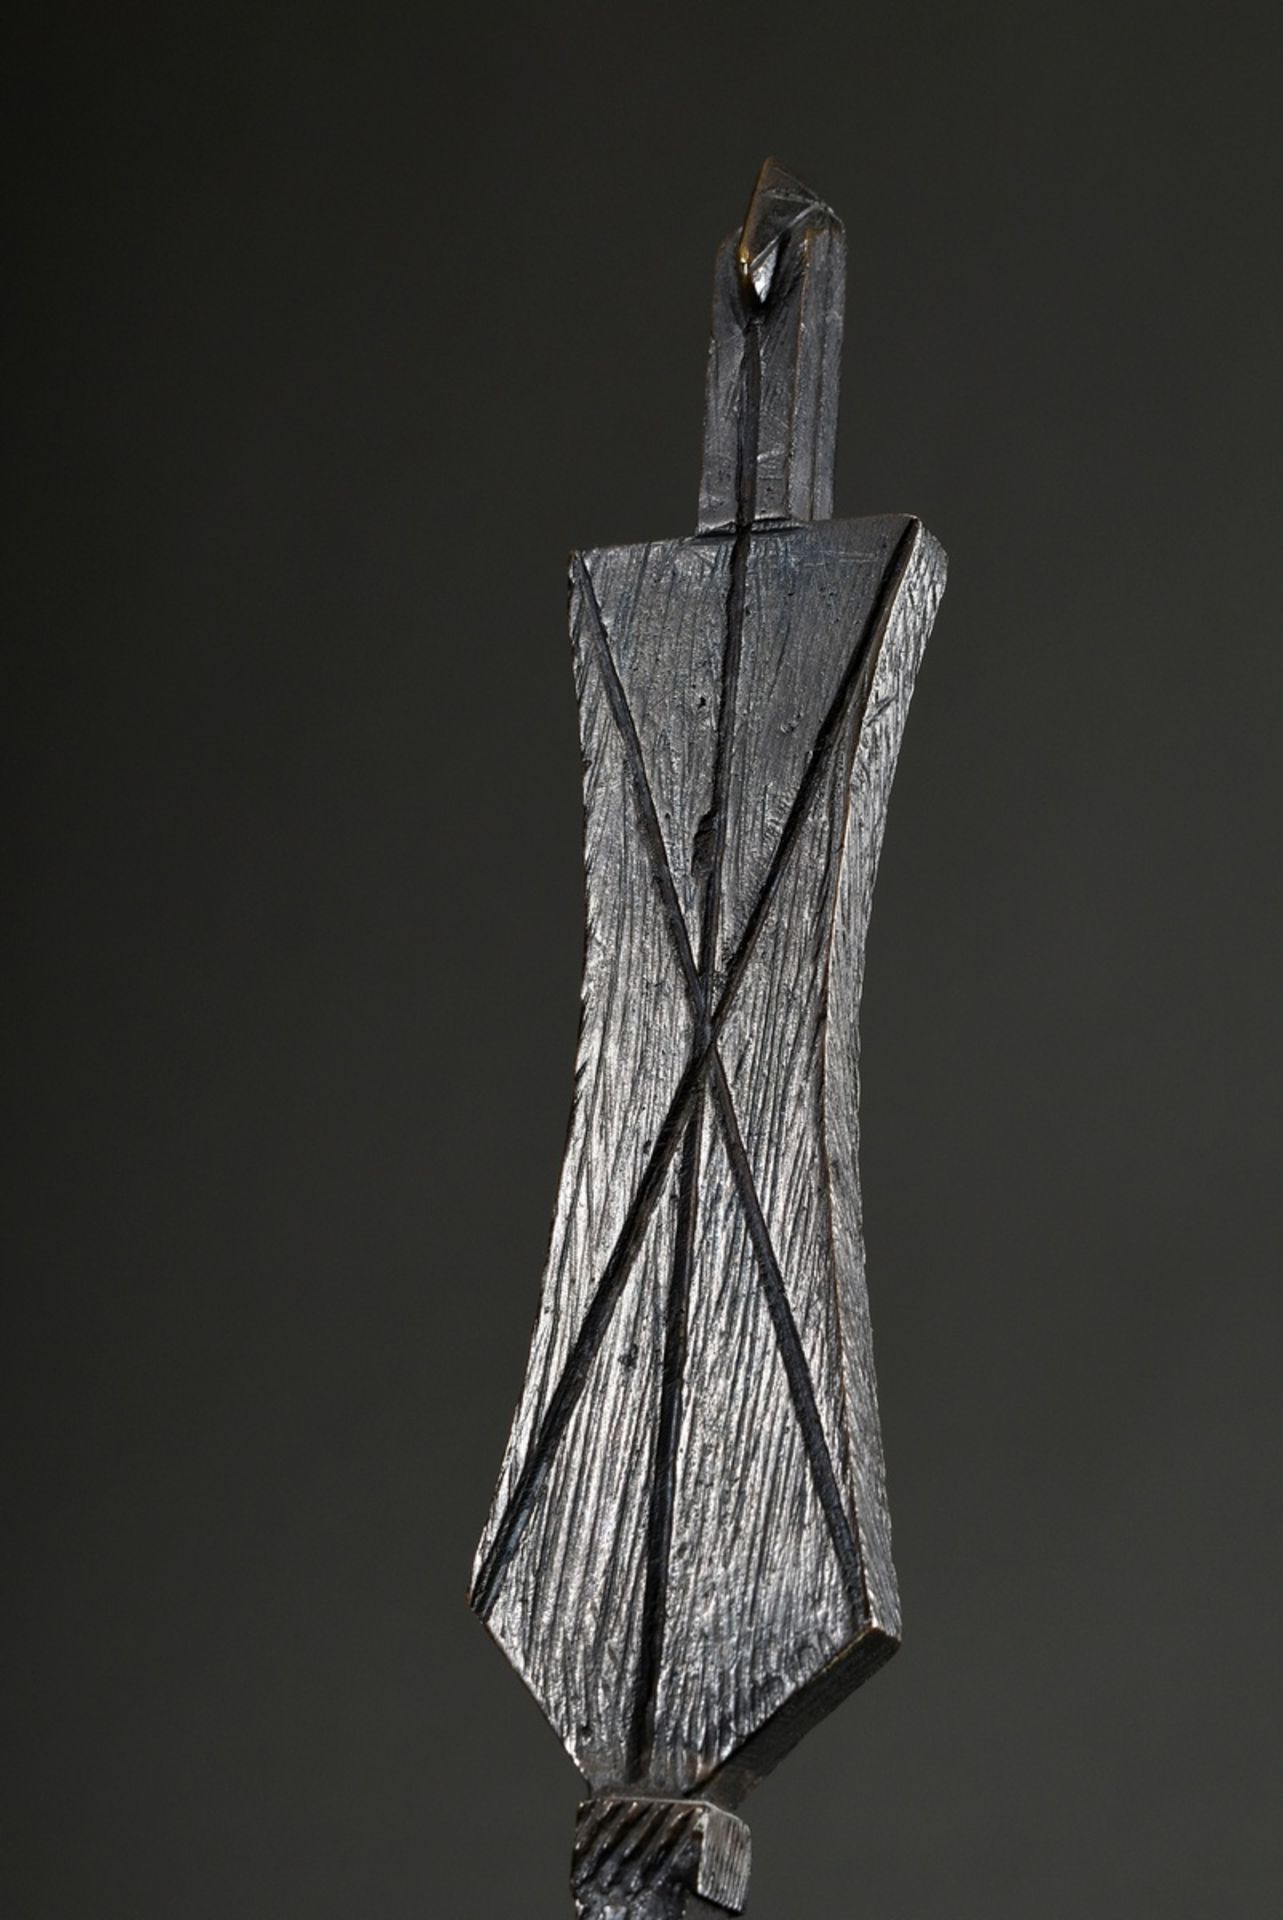 Kriester, Rainer (1935-2002) "Stele", bronze, on the base inscribed Kriester, foundry Zimmer, verso - Image 4 of 6